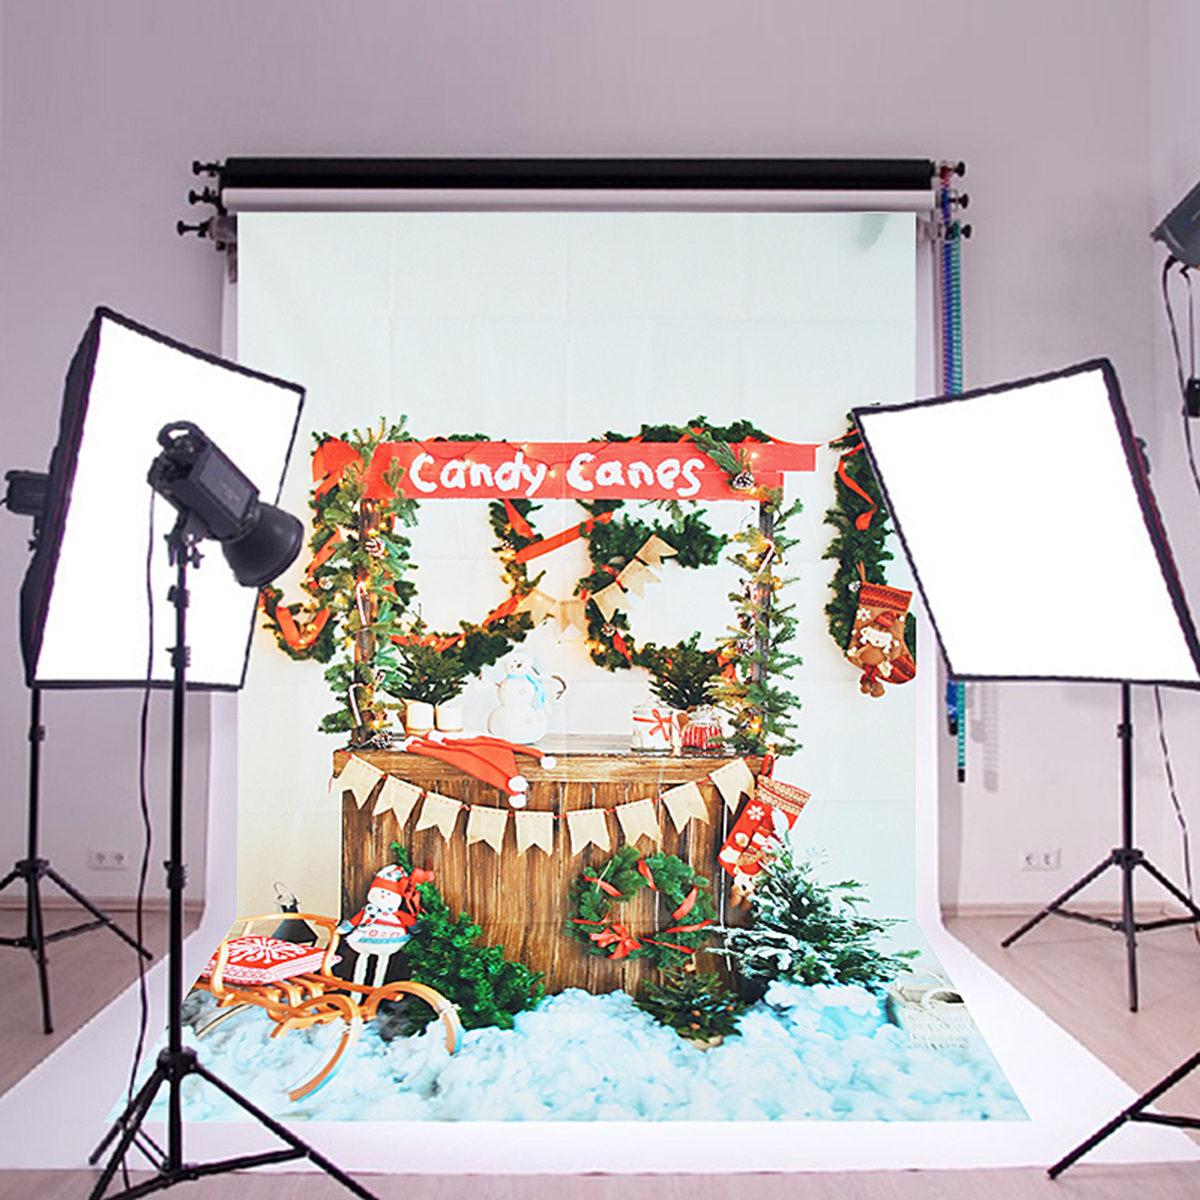 5x7FT-Christmas-Candy-Canes-Photography-Backdrop-Background-Studio-Prop-1208715-3